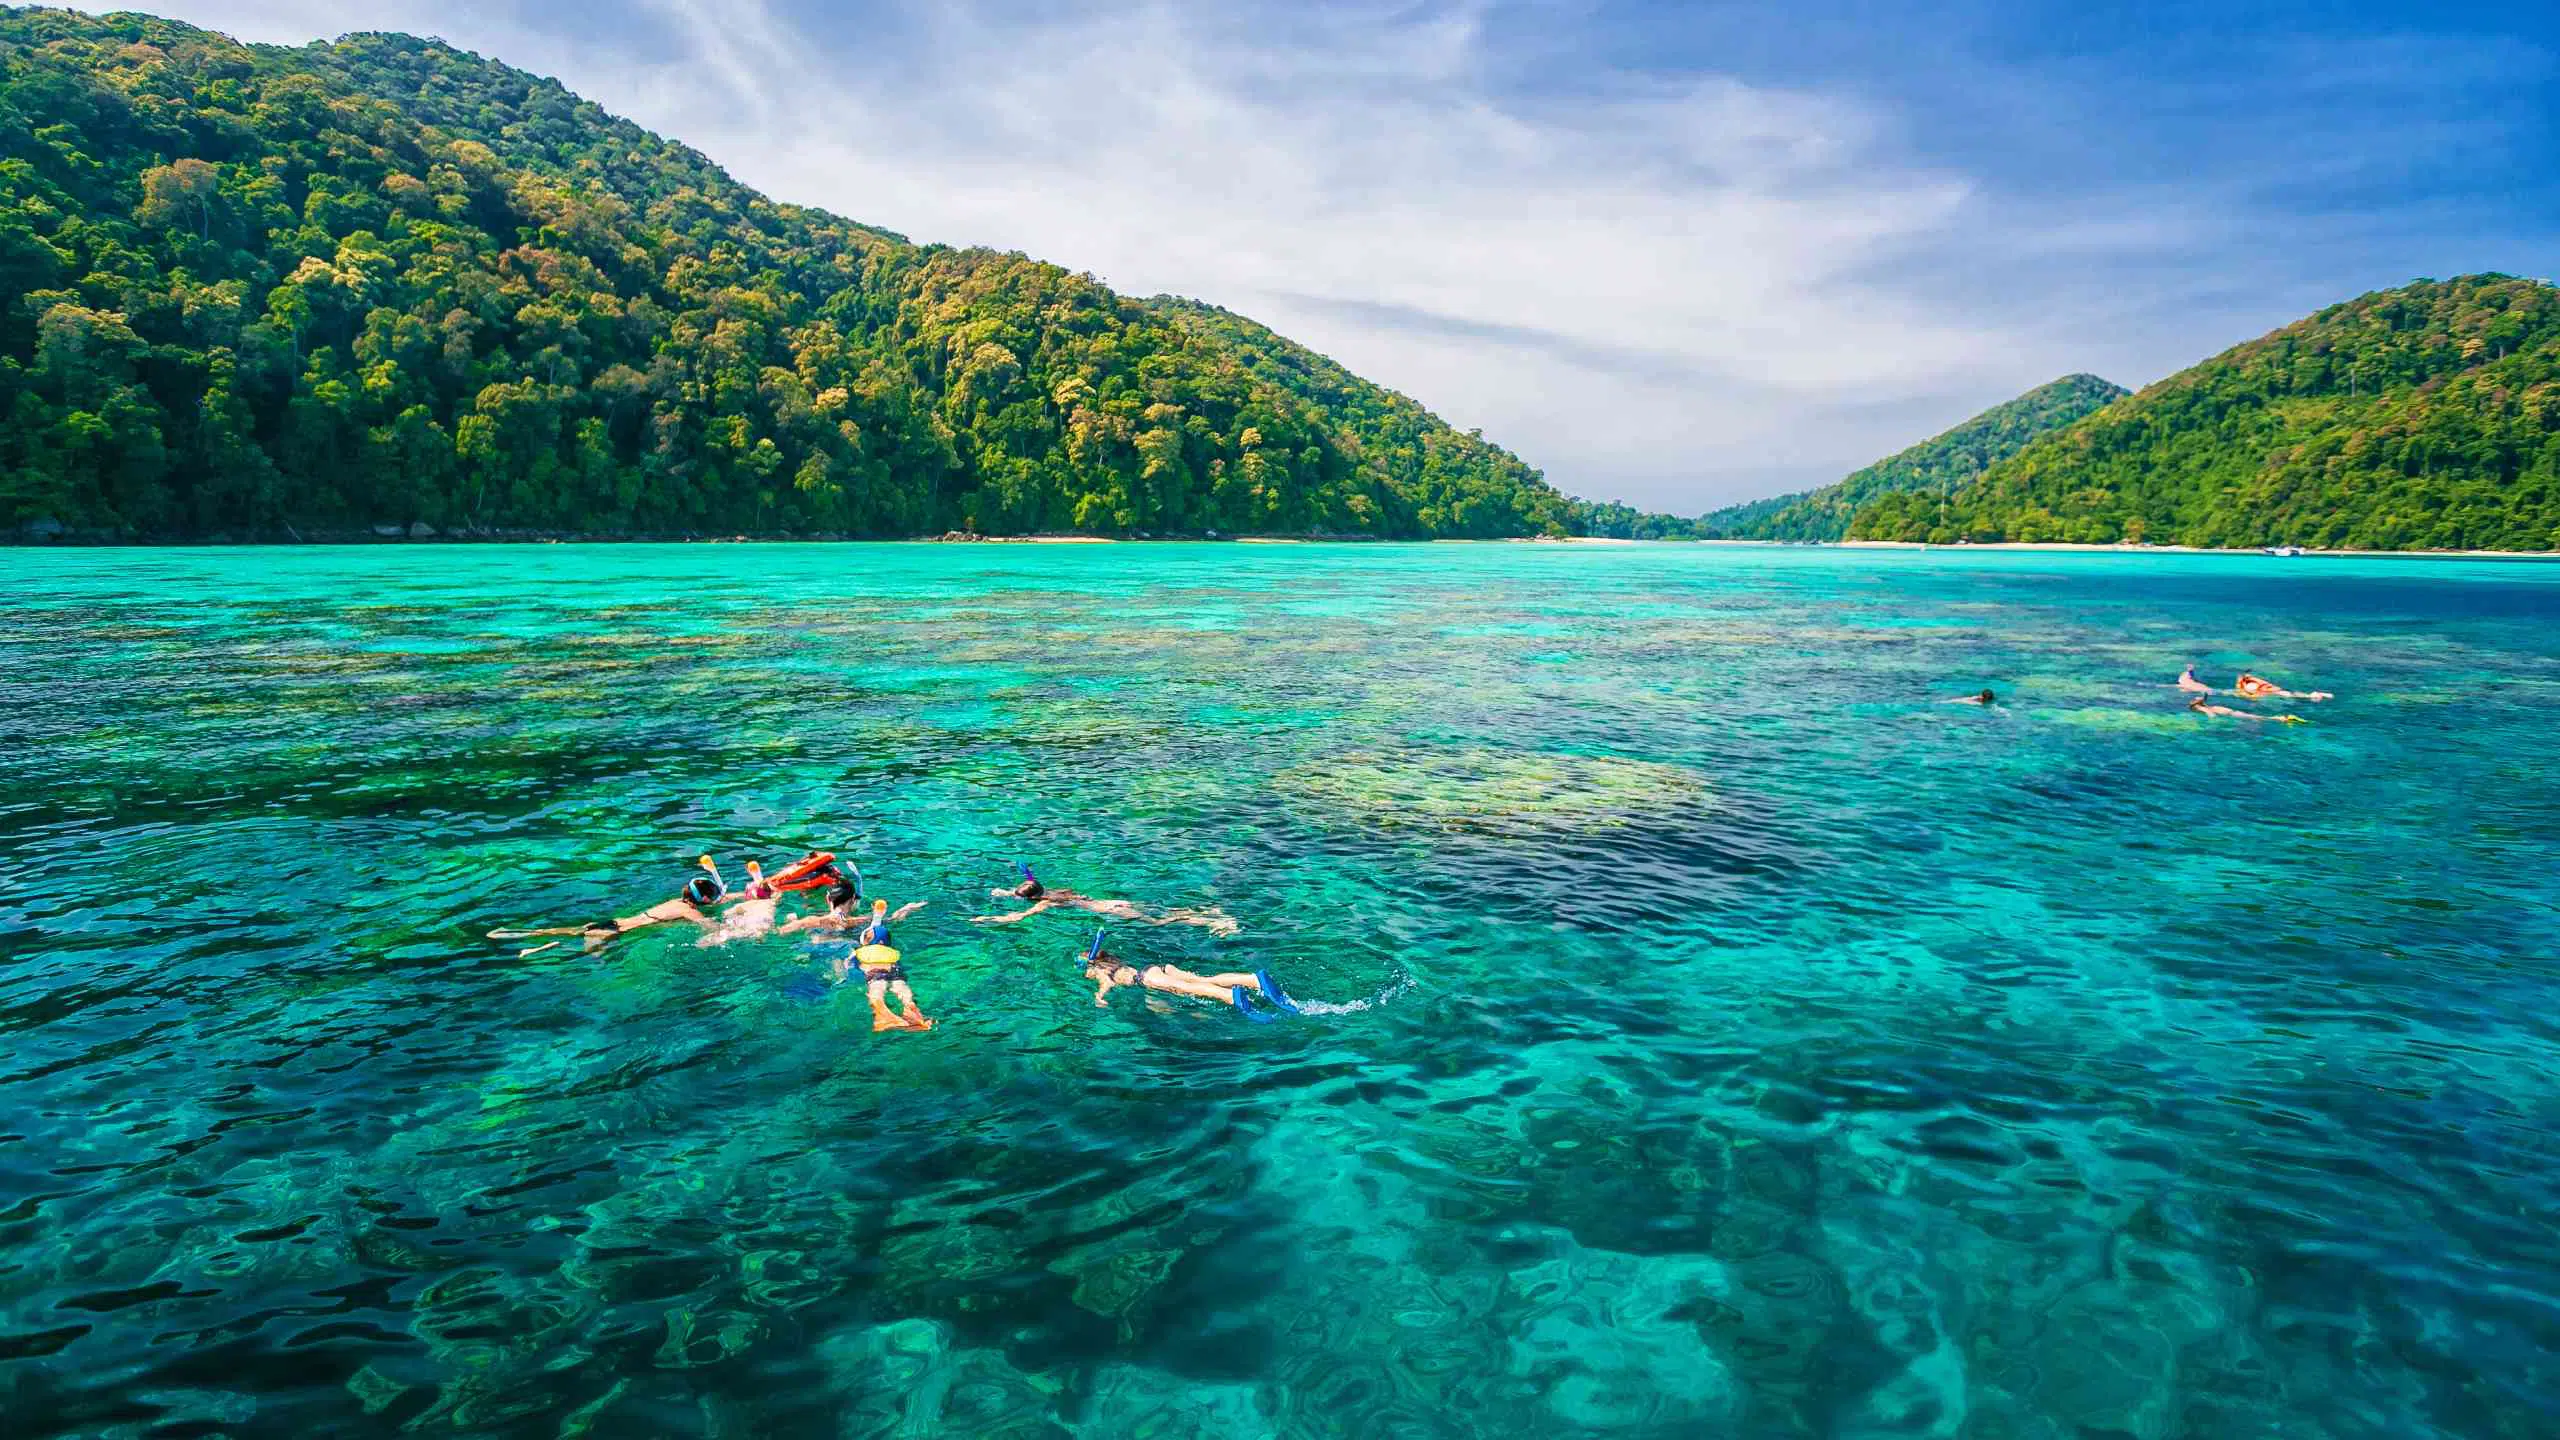 Snorkelling in the Surin Islands